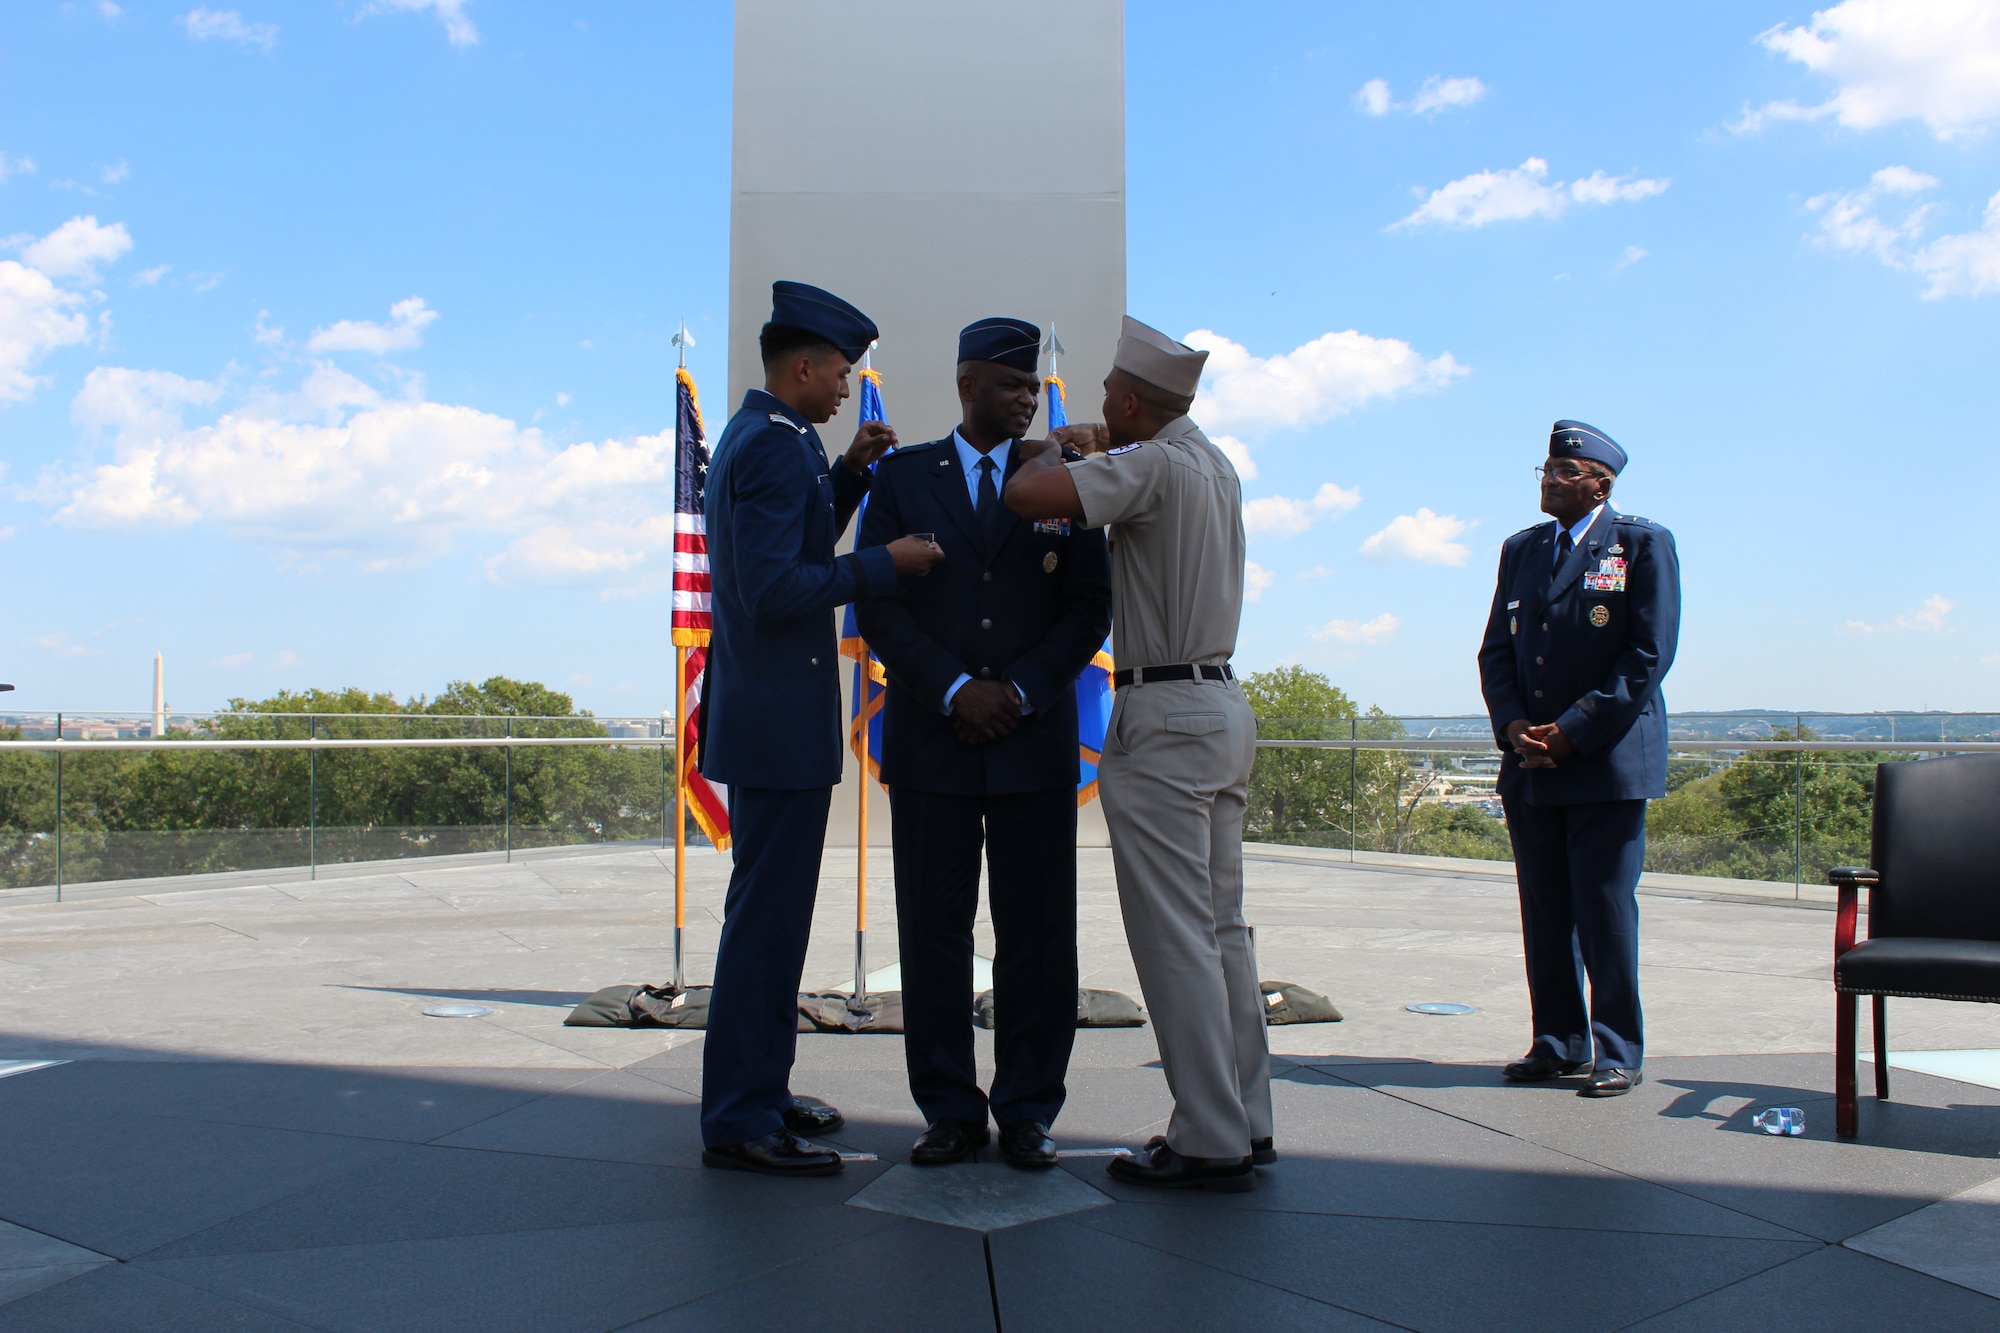 Brig. Gen. Alfred K. Flowers, Jr. (center), Air Force Medical Service Manpower, Personnel and Resources director, gets his brigadier general rank pinned on by his sons, Kendell Flowers (left), a cadet at the U.S. Air Force Academy, and Ayden Flowers, a cadet at Texas A&M, during his promotion ceremony at the Air Force Memorial in Arlington Va., Sept. 7, 2021.